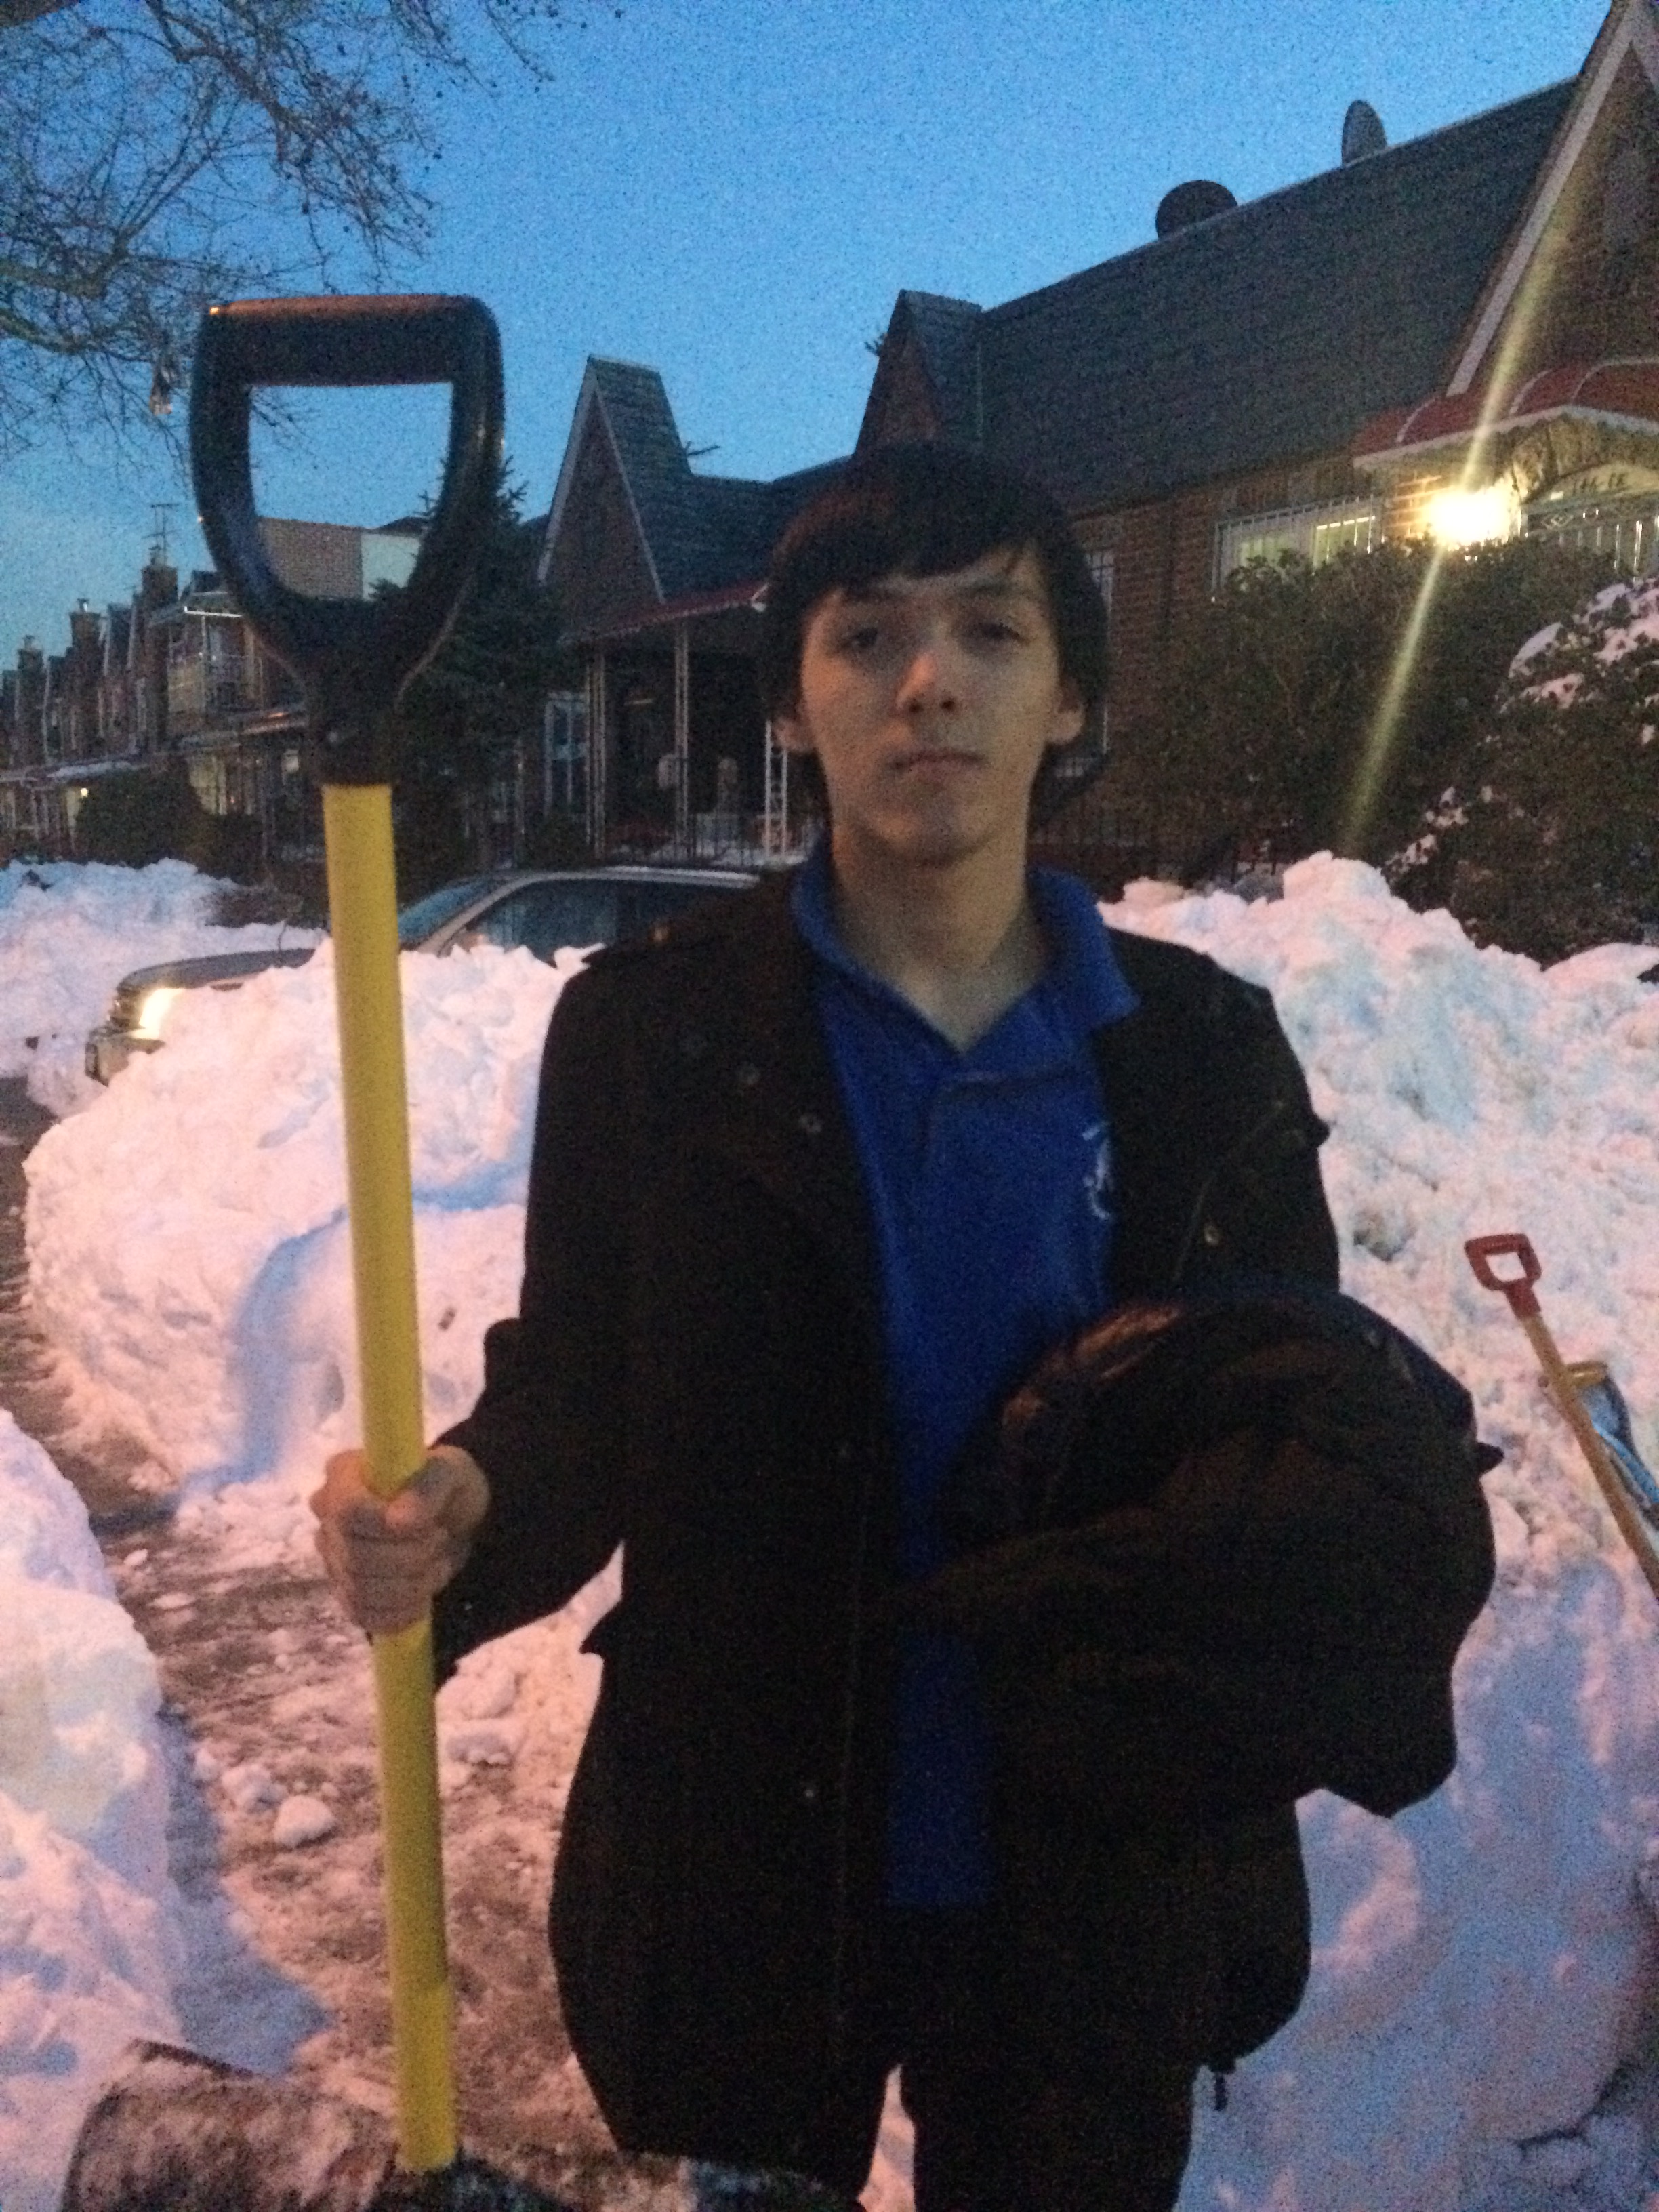 With shovel in hand, Anton Homitz was ready to clear the way.